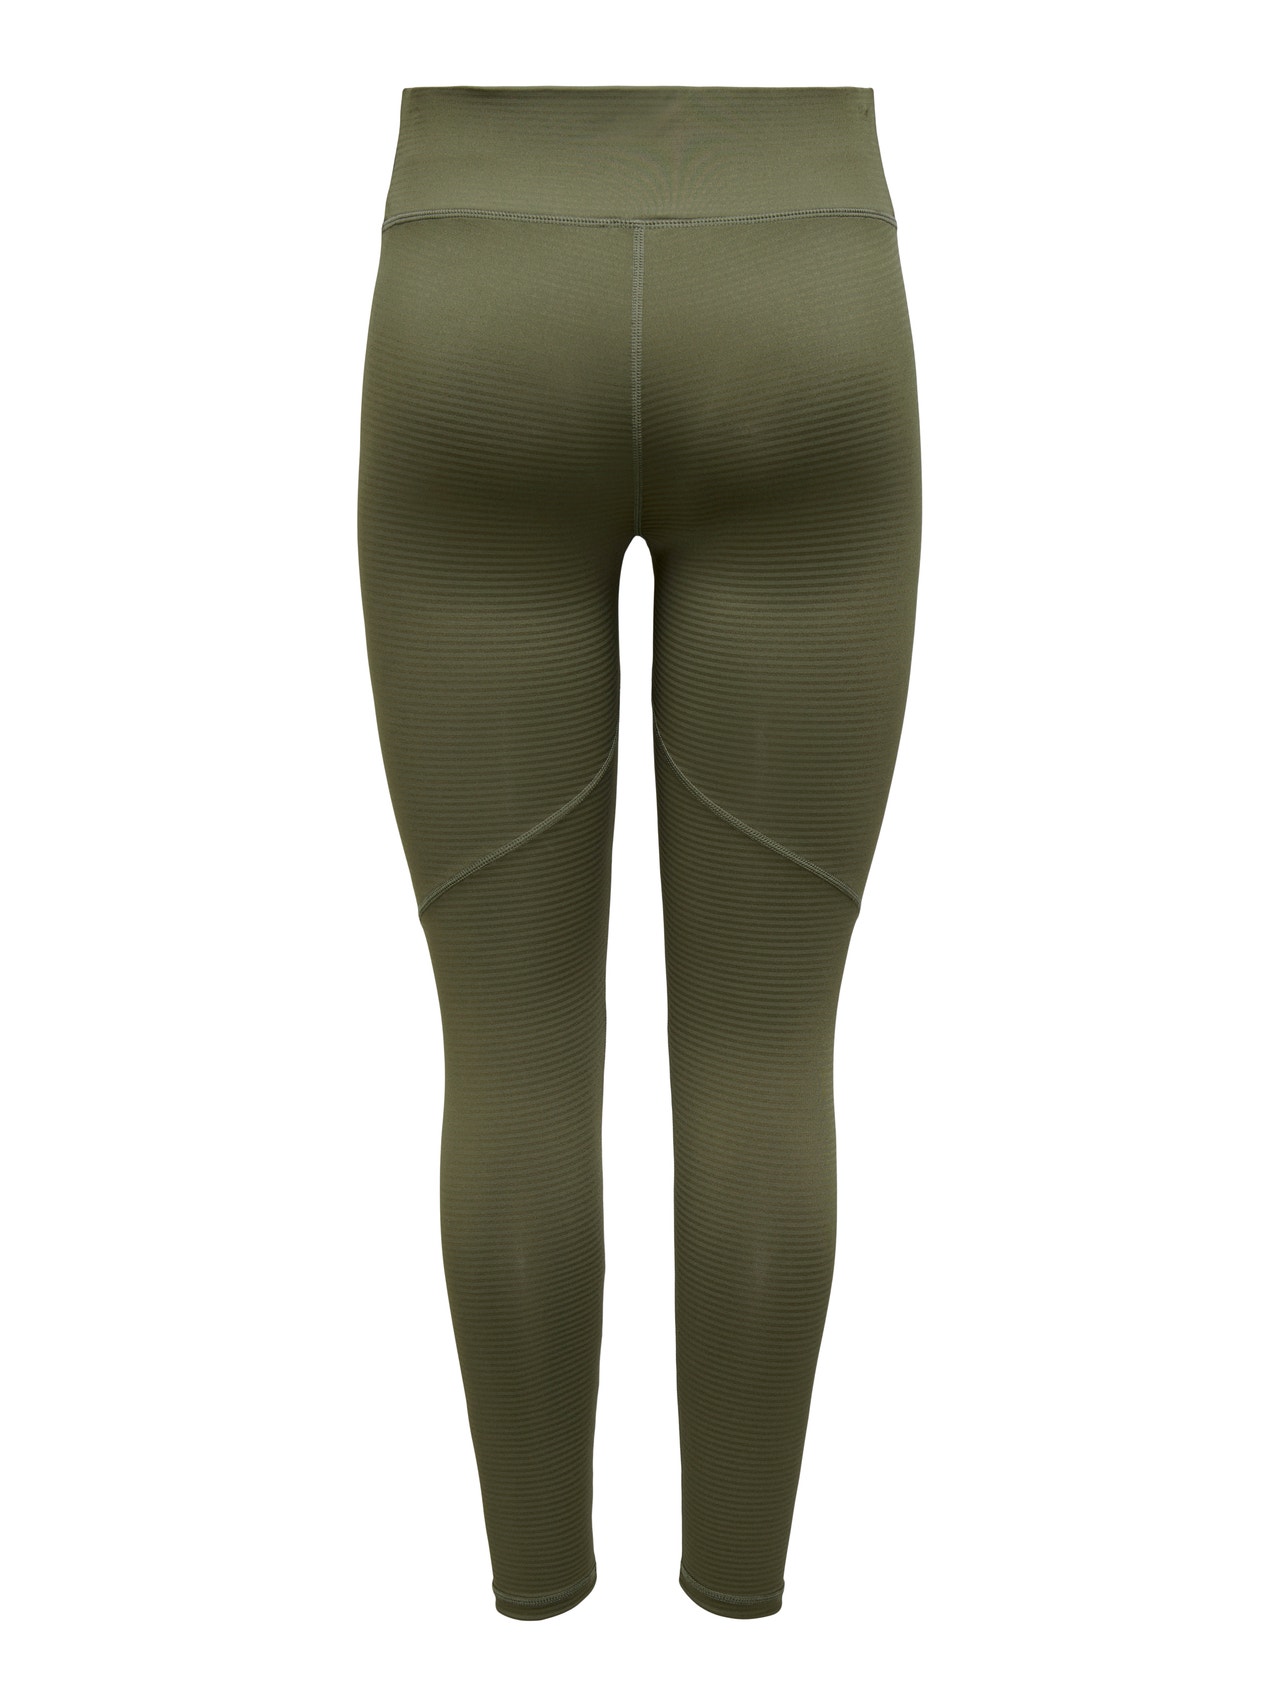 ONLY Slim Fit Hohe Taille Leggings -Tarmac - 15253999